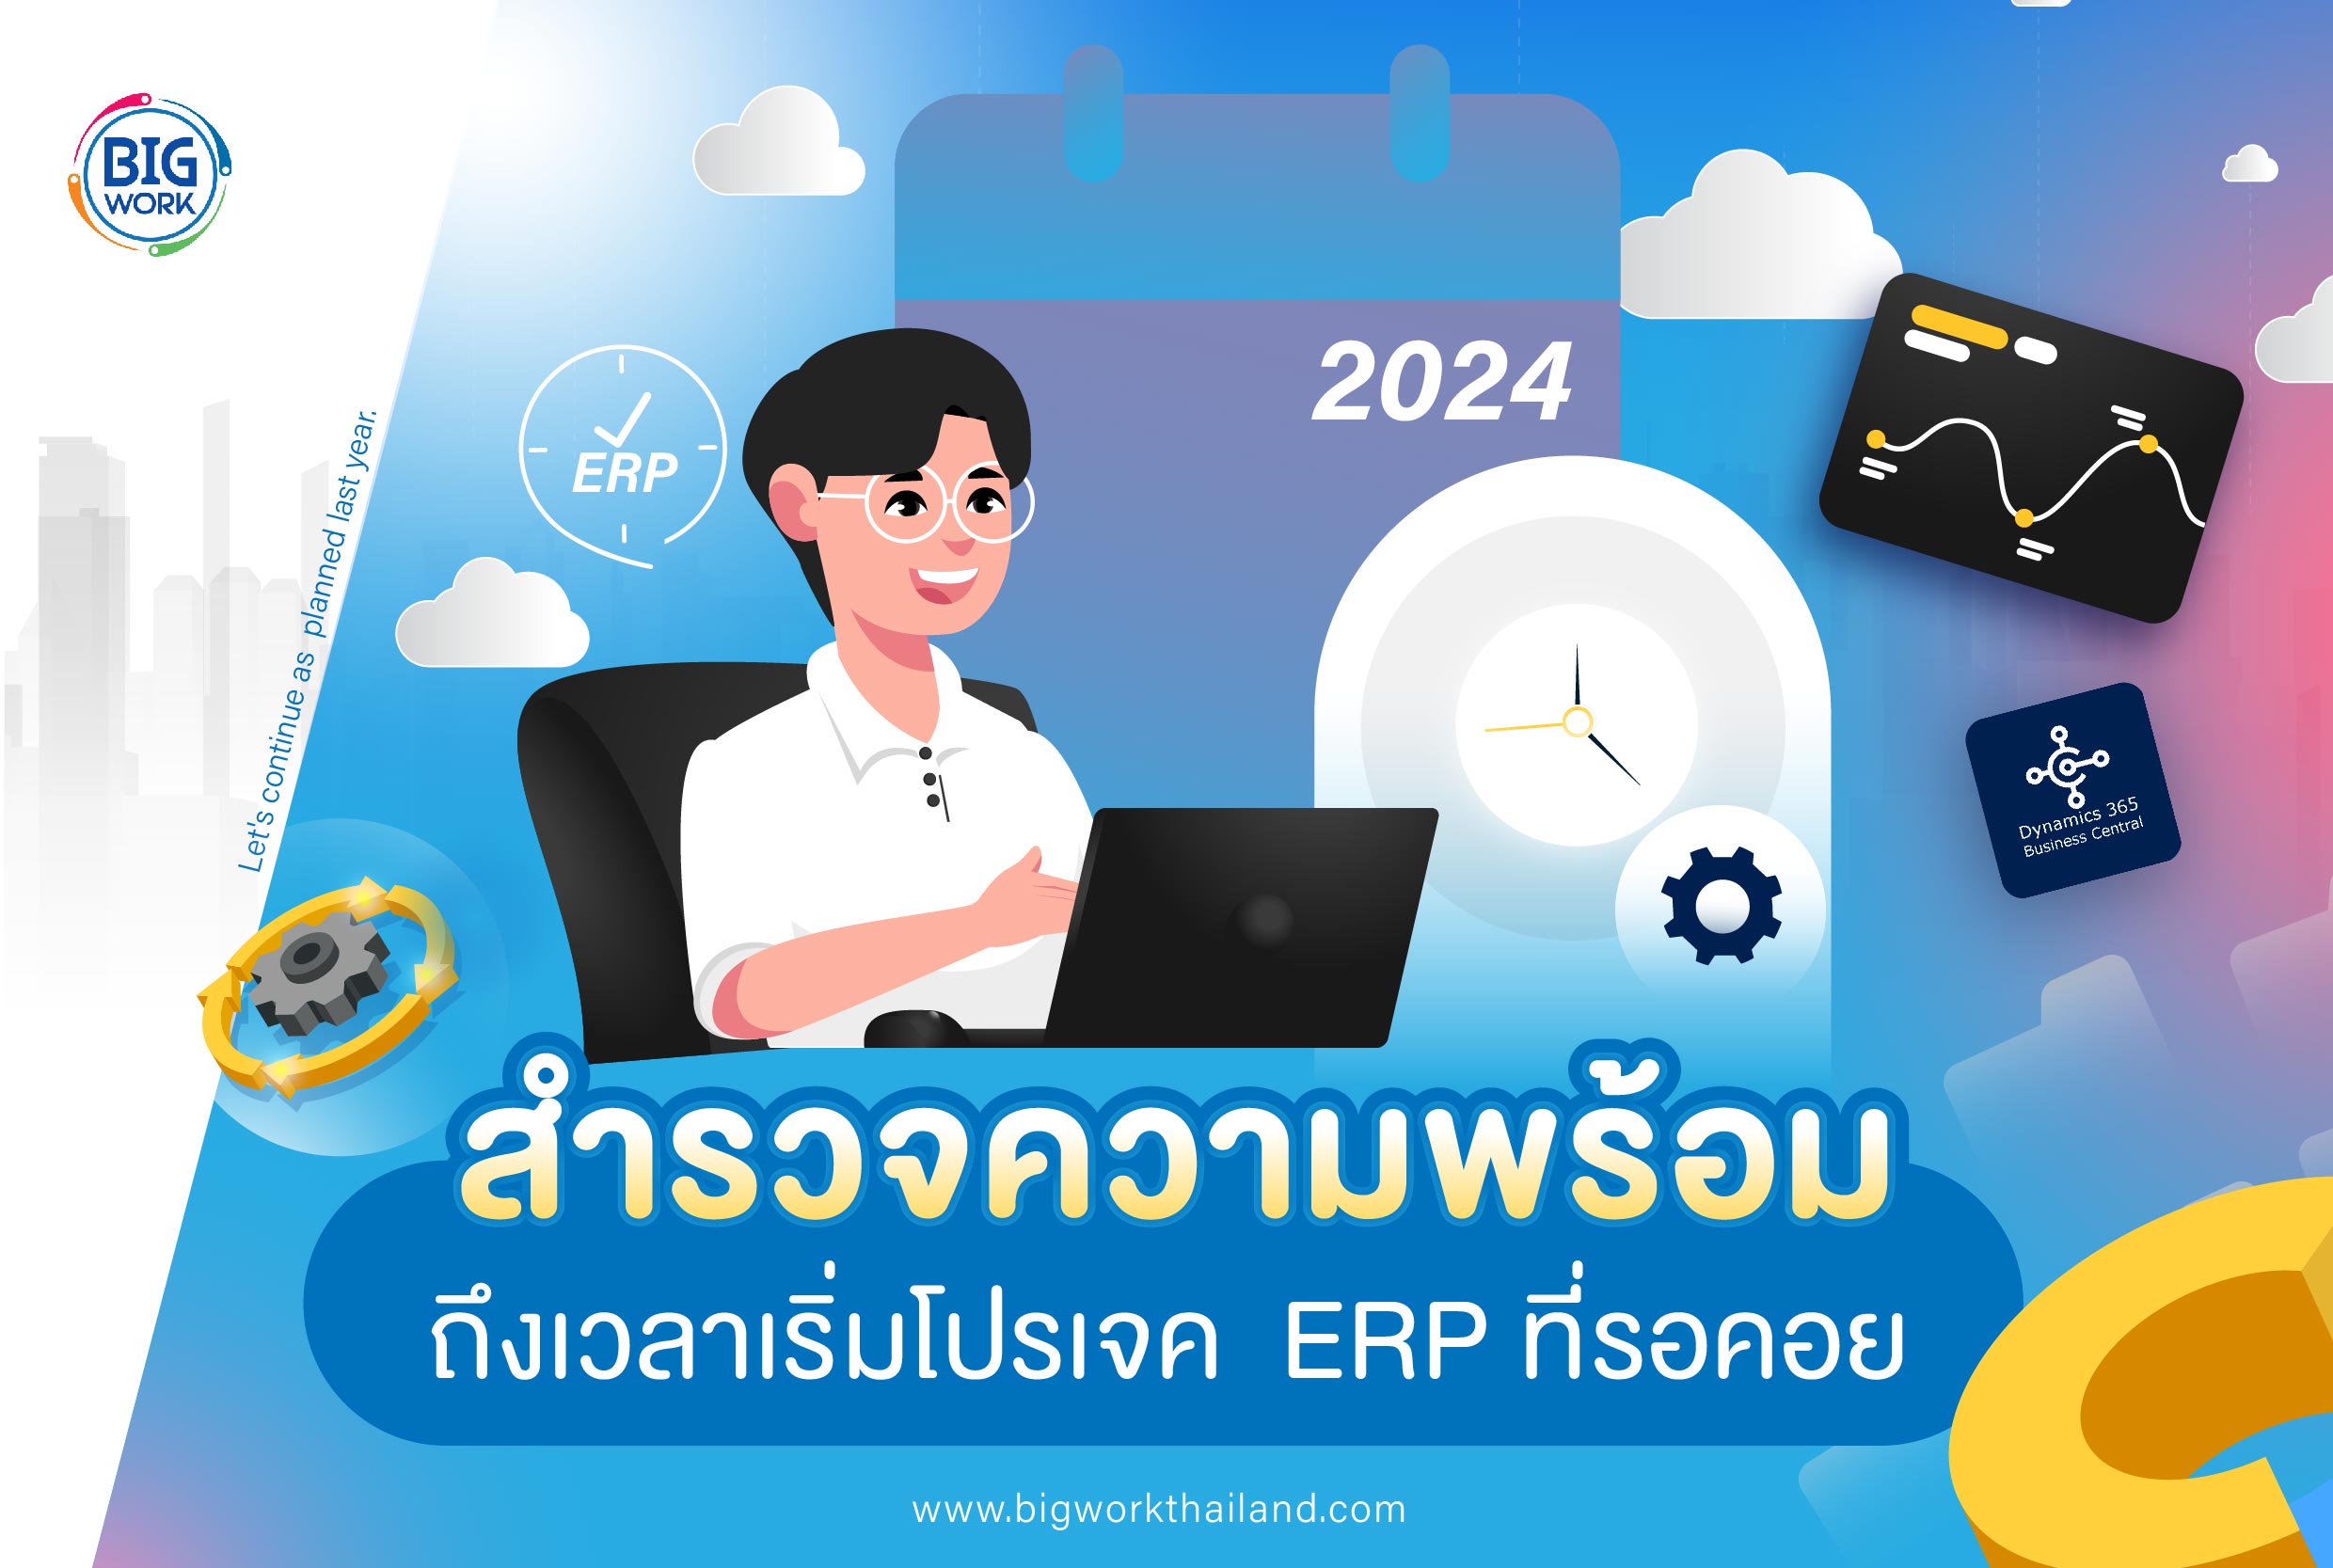 Get Ready Now it's time to start the awaited ERP project.